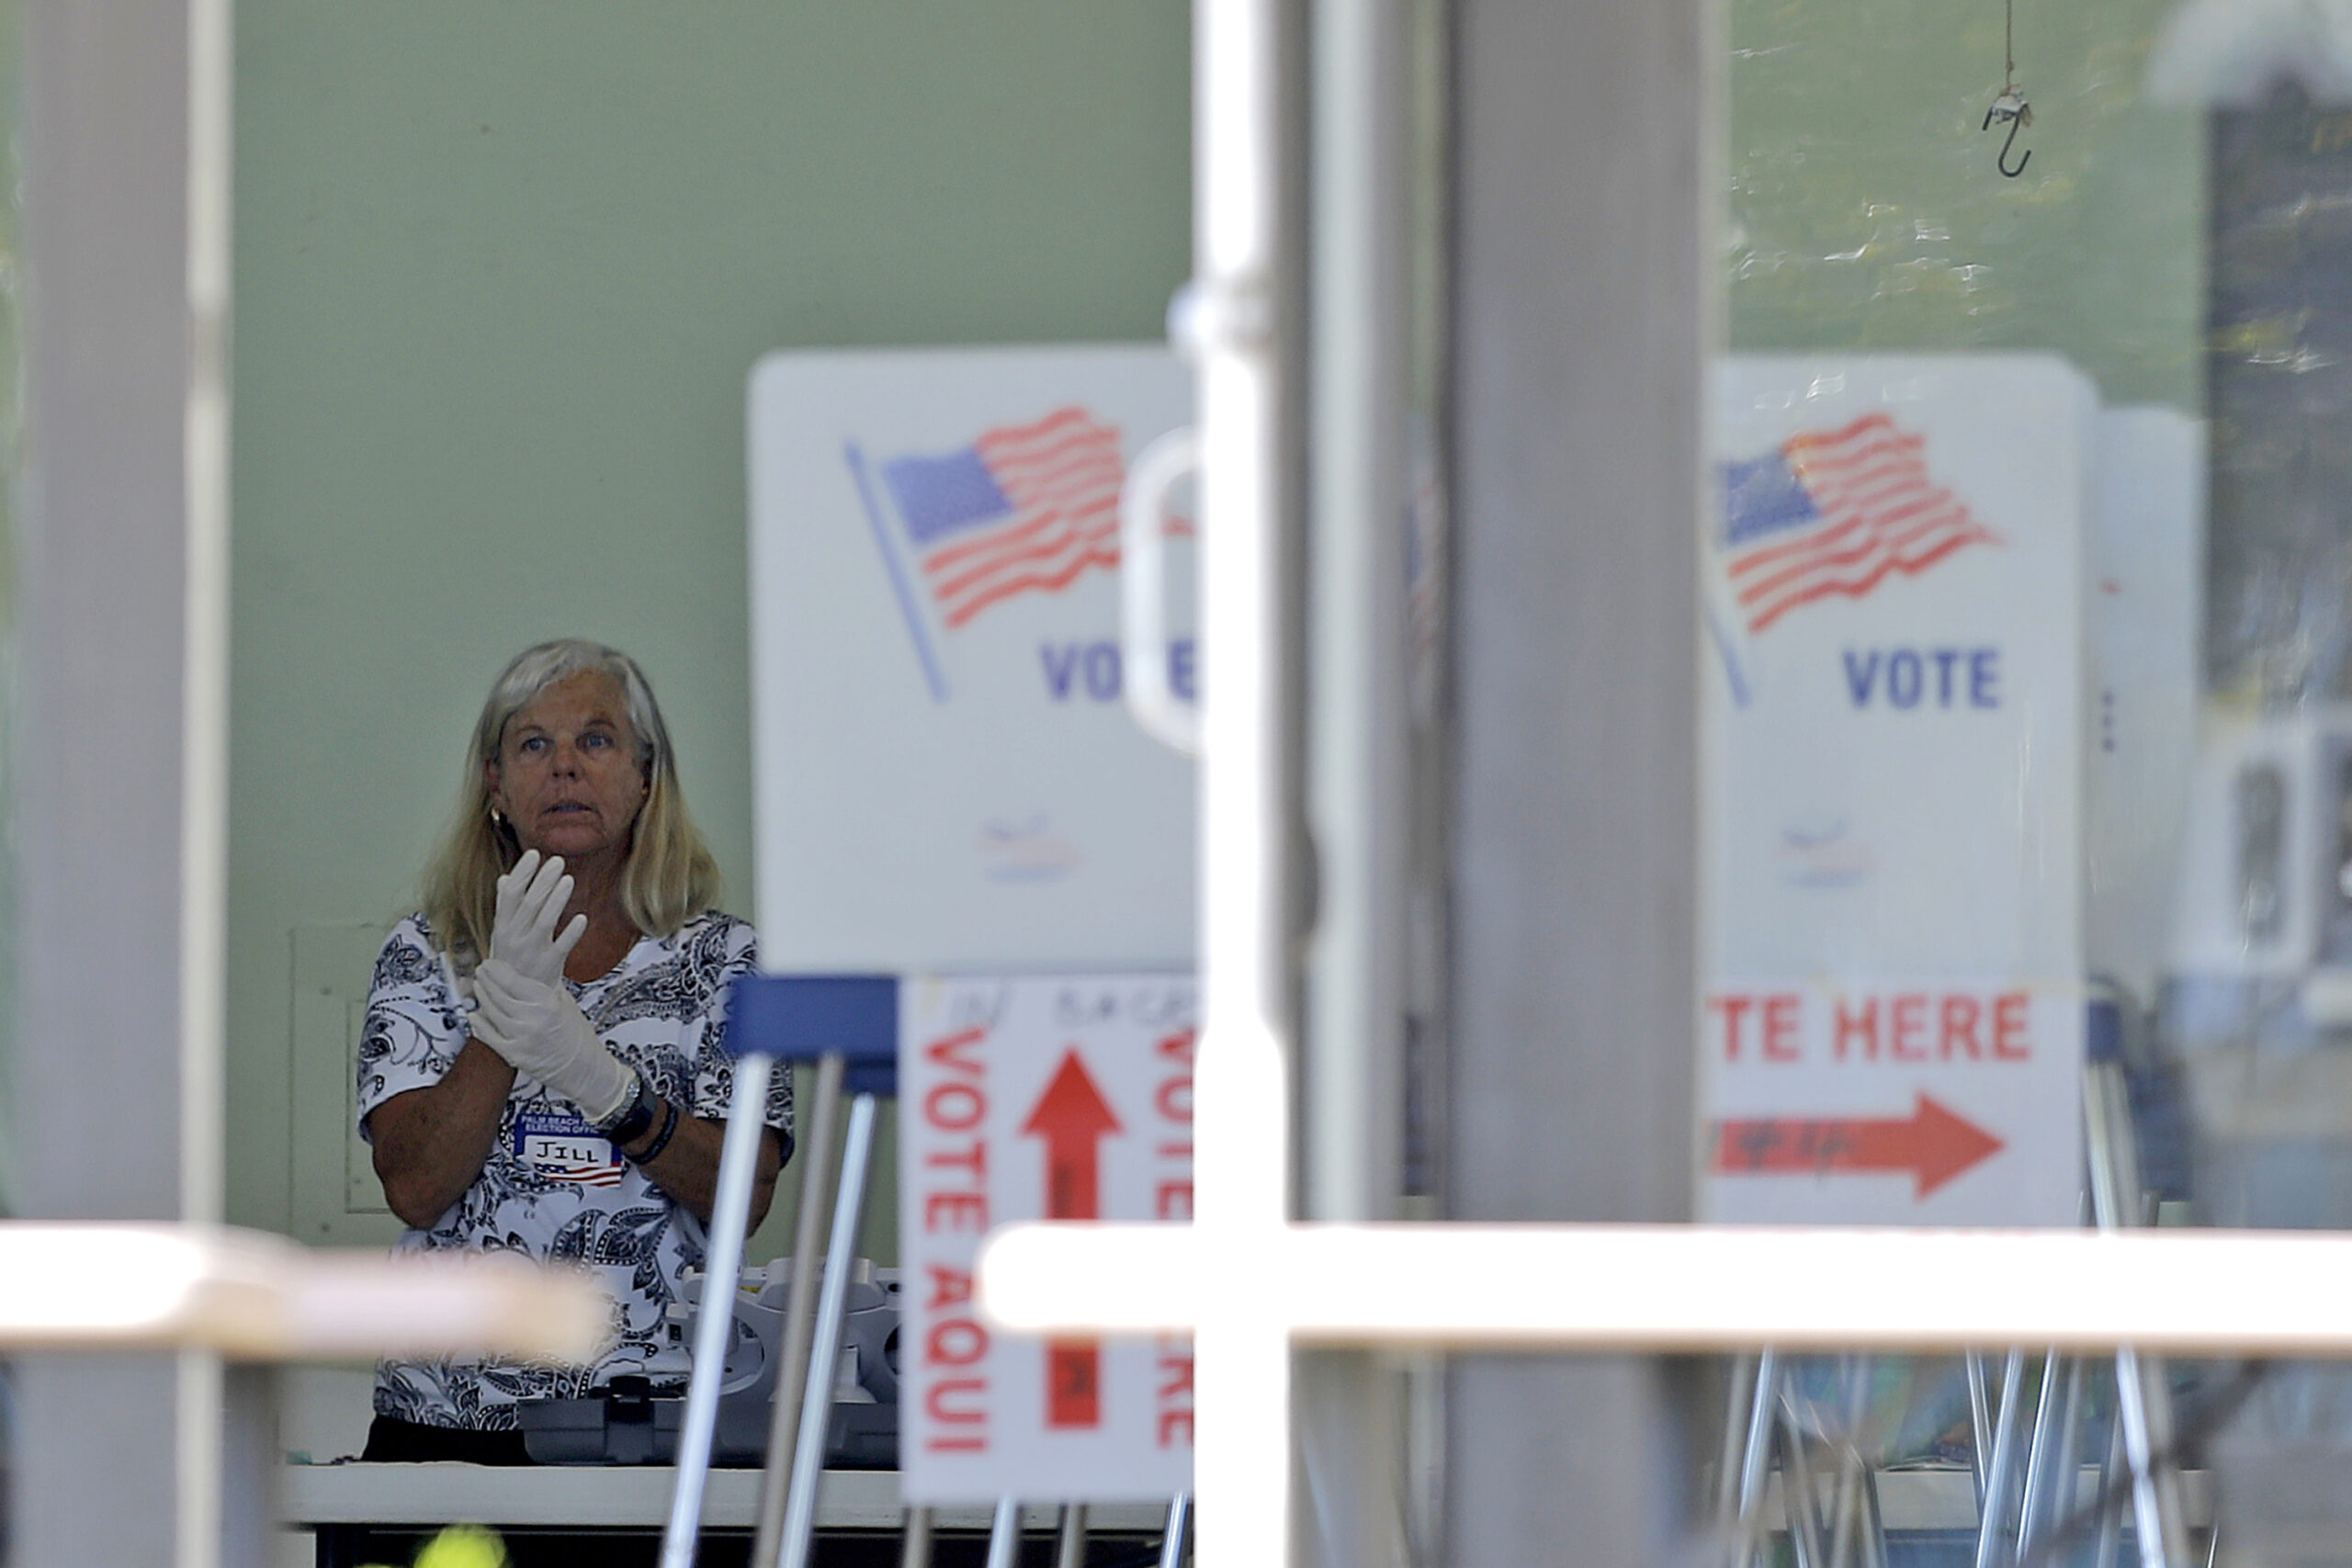 A polling place worker adjusts gloves as she tends to a reception table